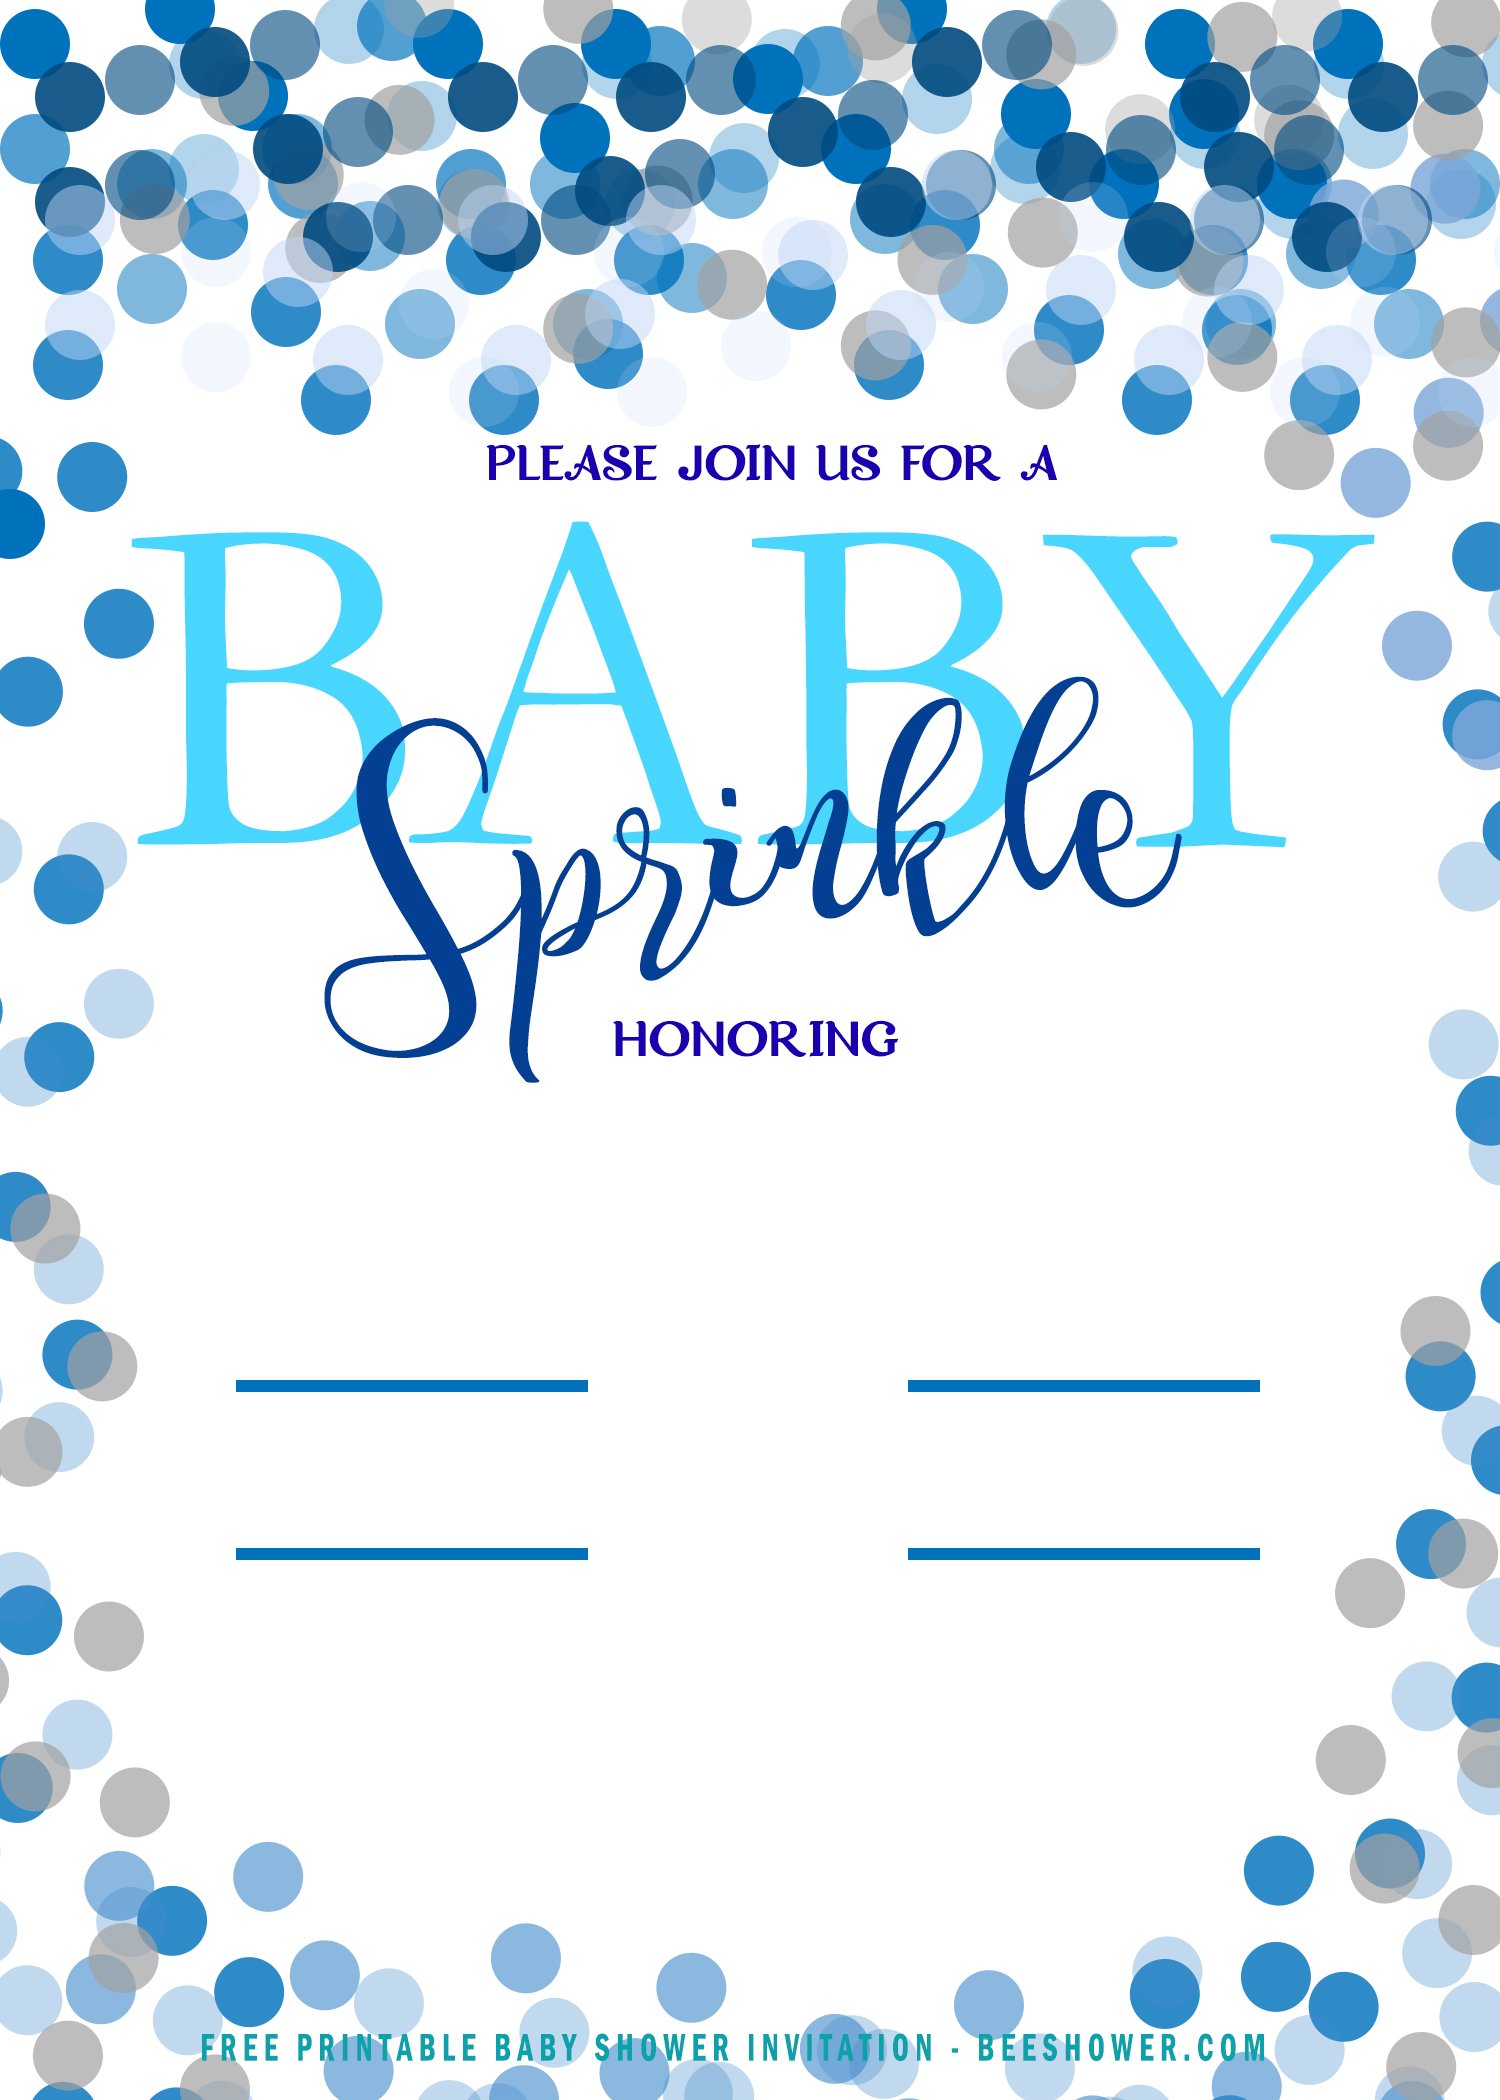 Baby Shower Invitations Templates